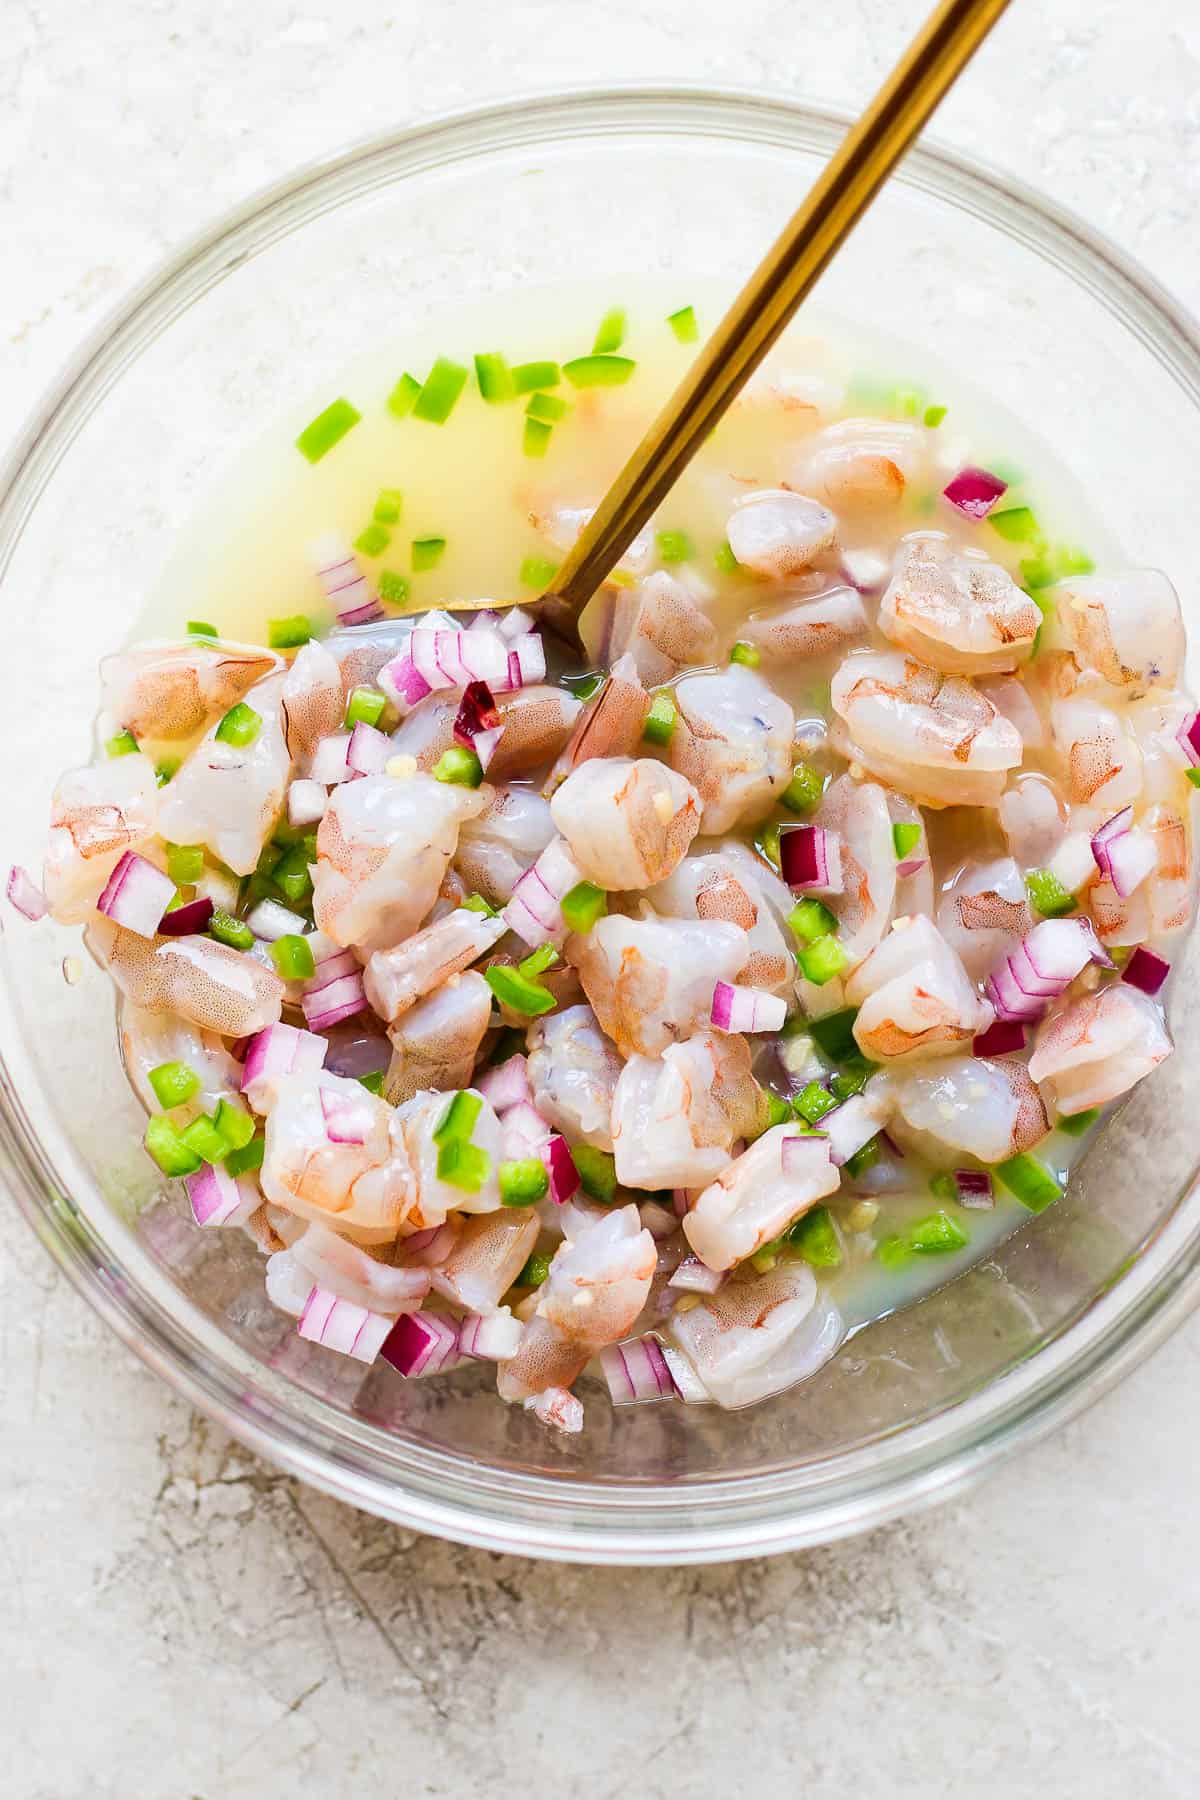 Ingredients for ceviche mixed together in a bowl.